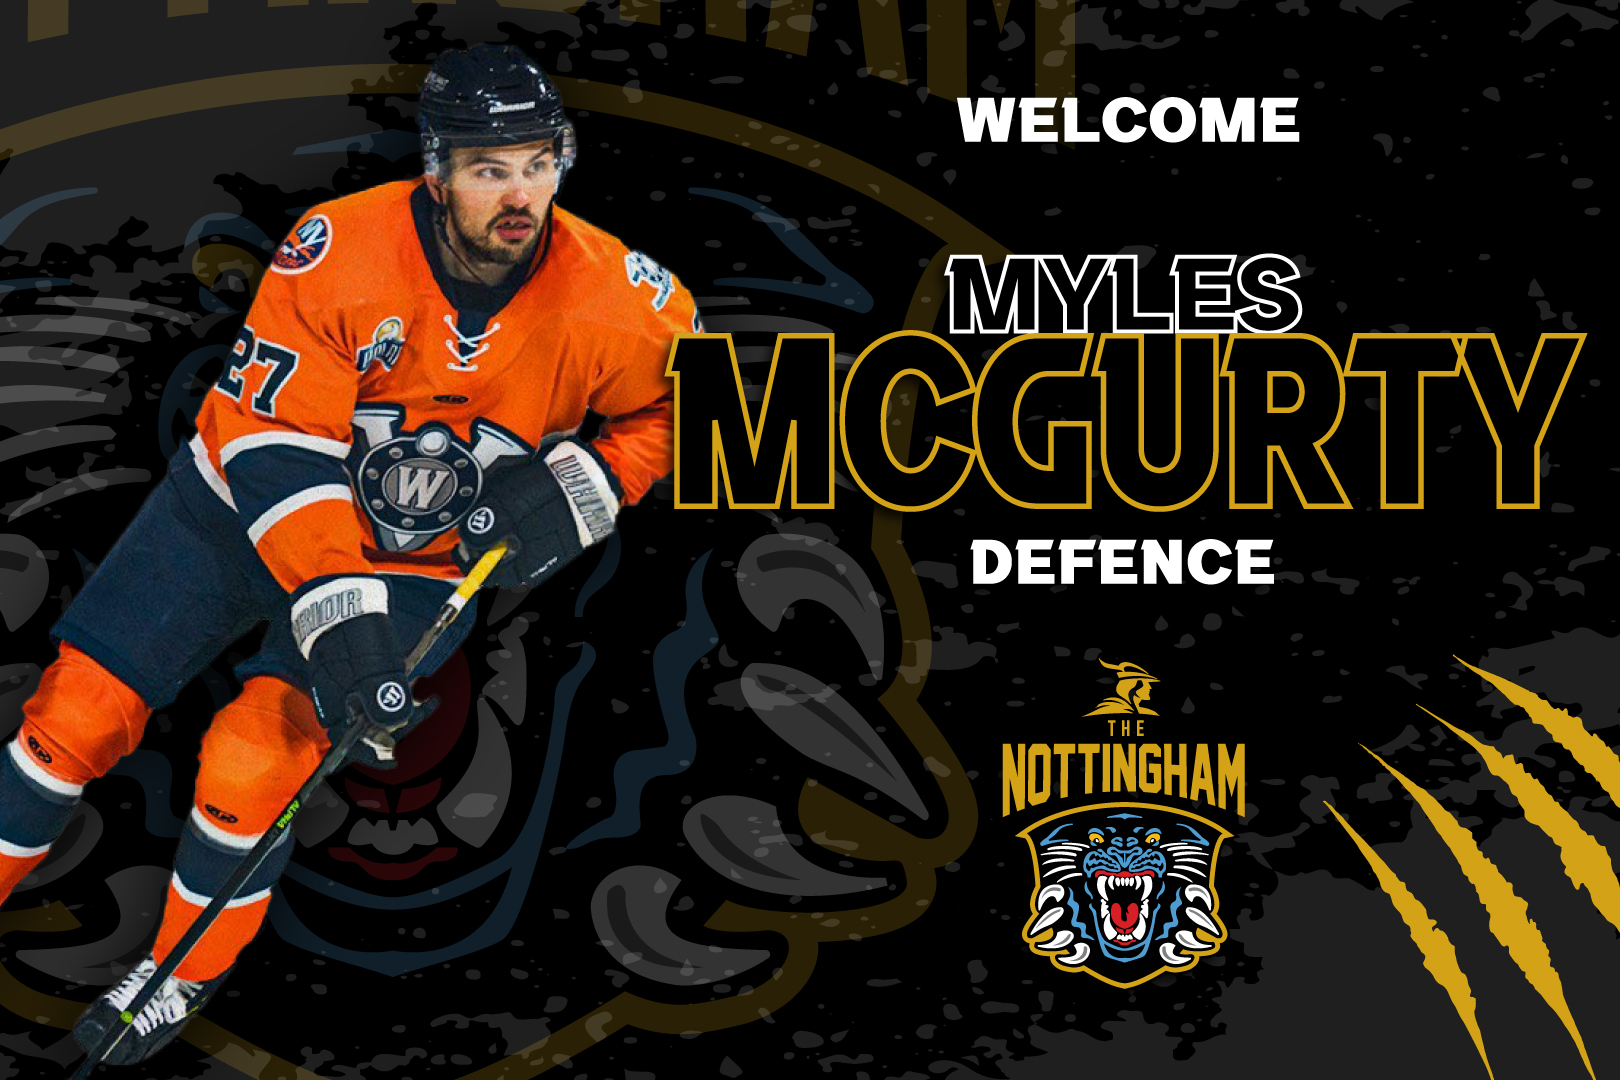 DEFENCEMAN MCGURTY JOINS PANTHERS Top Image